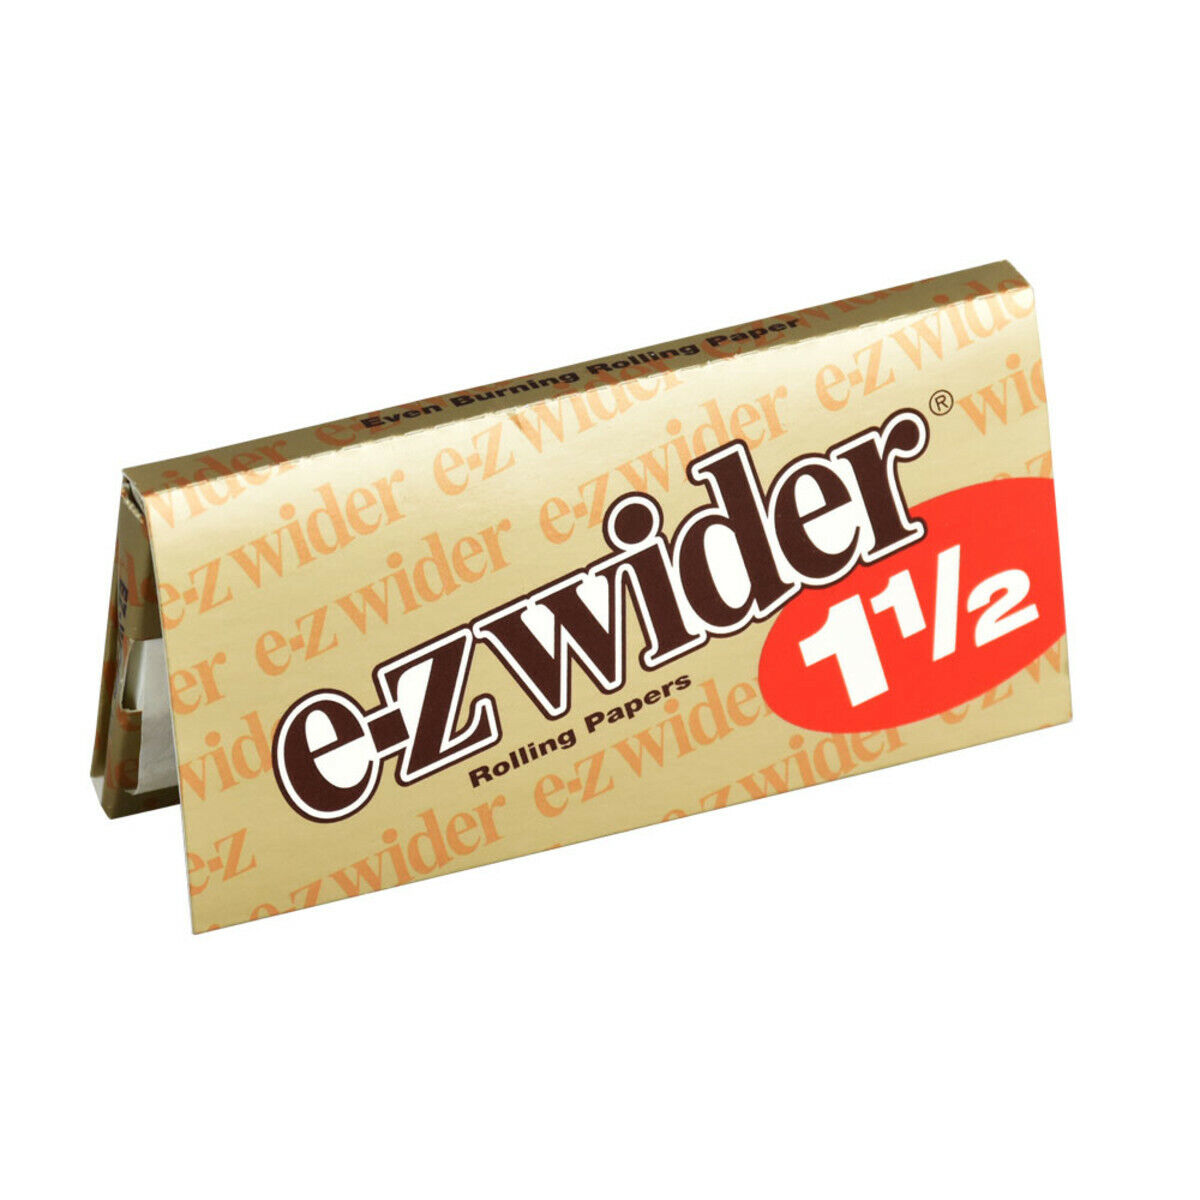 E-Z Wider 1 1/2 Rolling Papers - 4 Pack